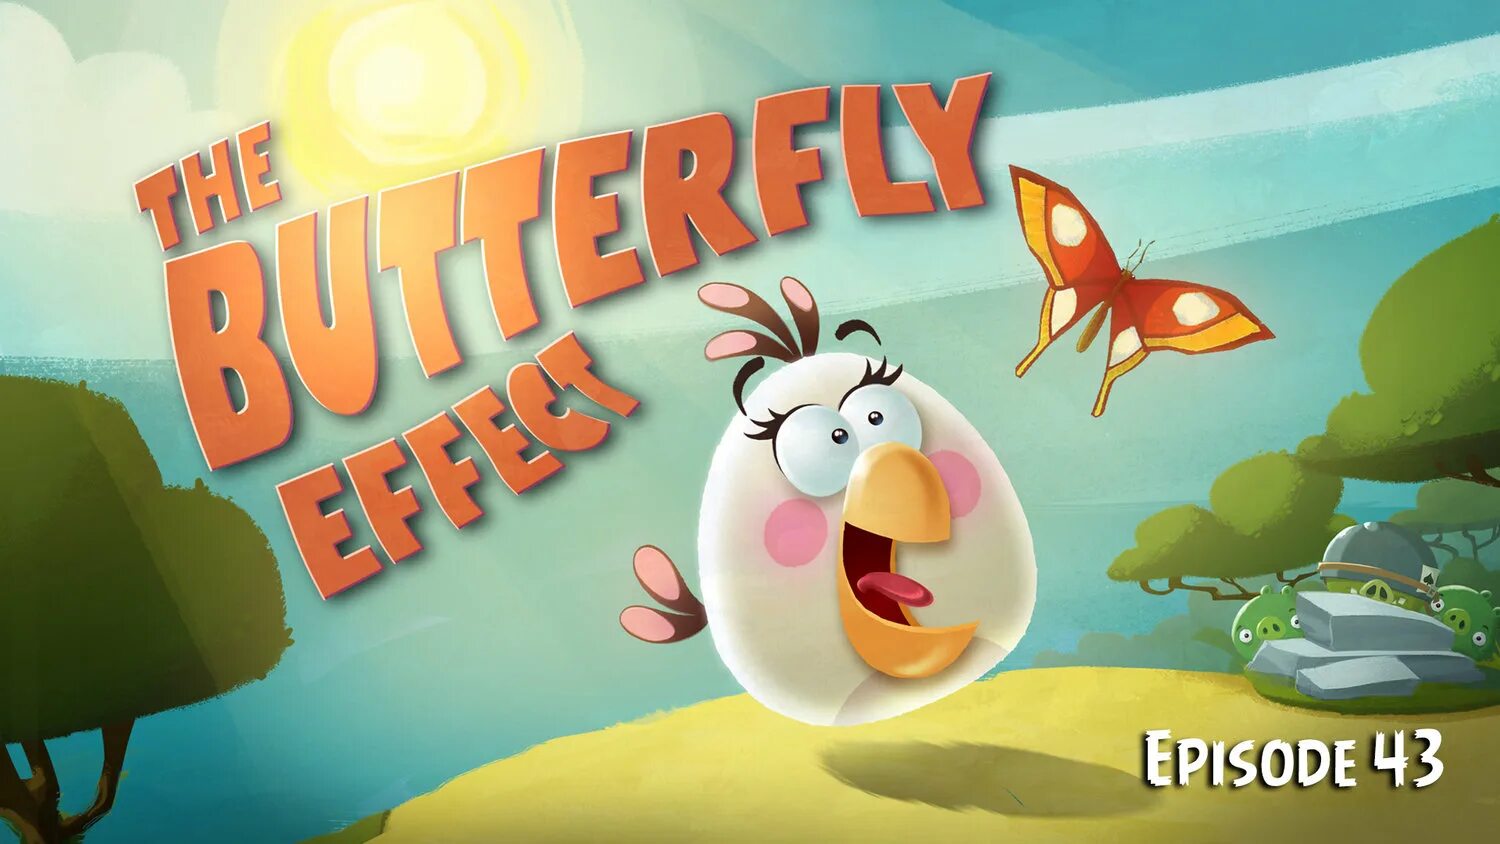 Angry birds toons episode. Злые птички (Angry Birds toons!) 2013. Angry Birds toons Episode 43 the Butterfly Effect.